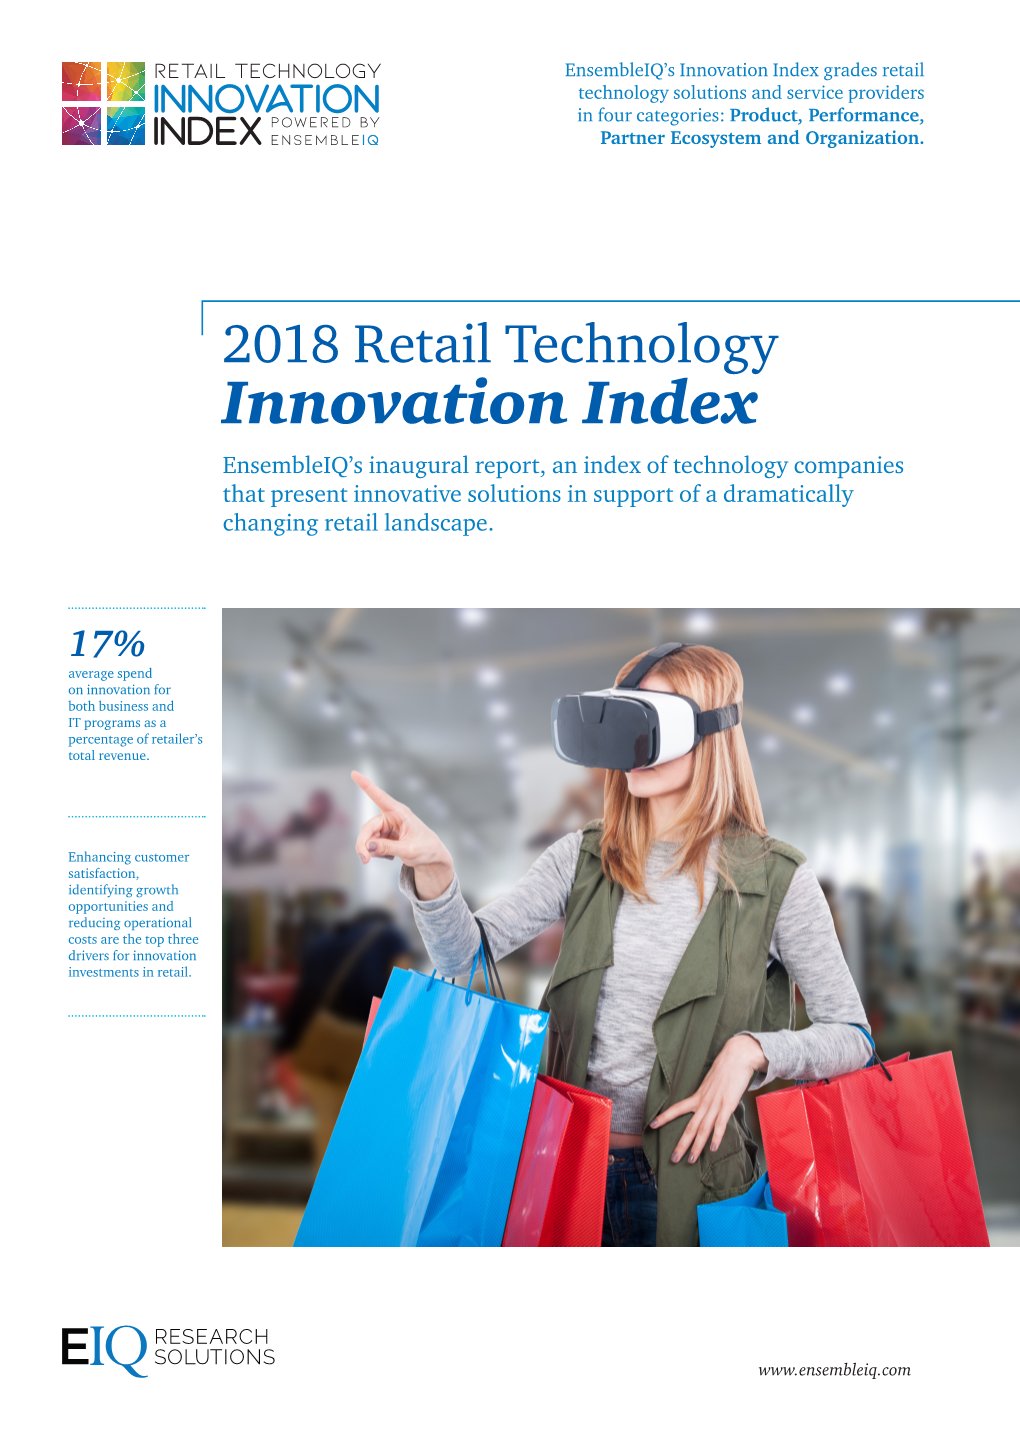 Innovation Index Grades Retail Technology Solutions and Service Providers in Four Categories: Product, Performance, Partner Ecosystem and Organization